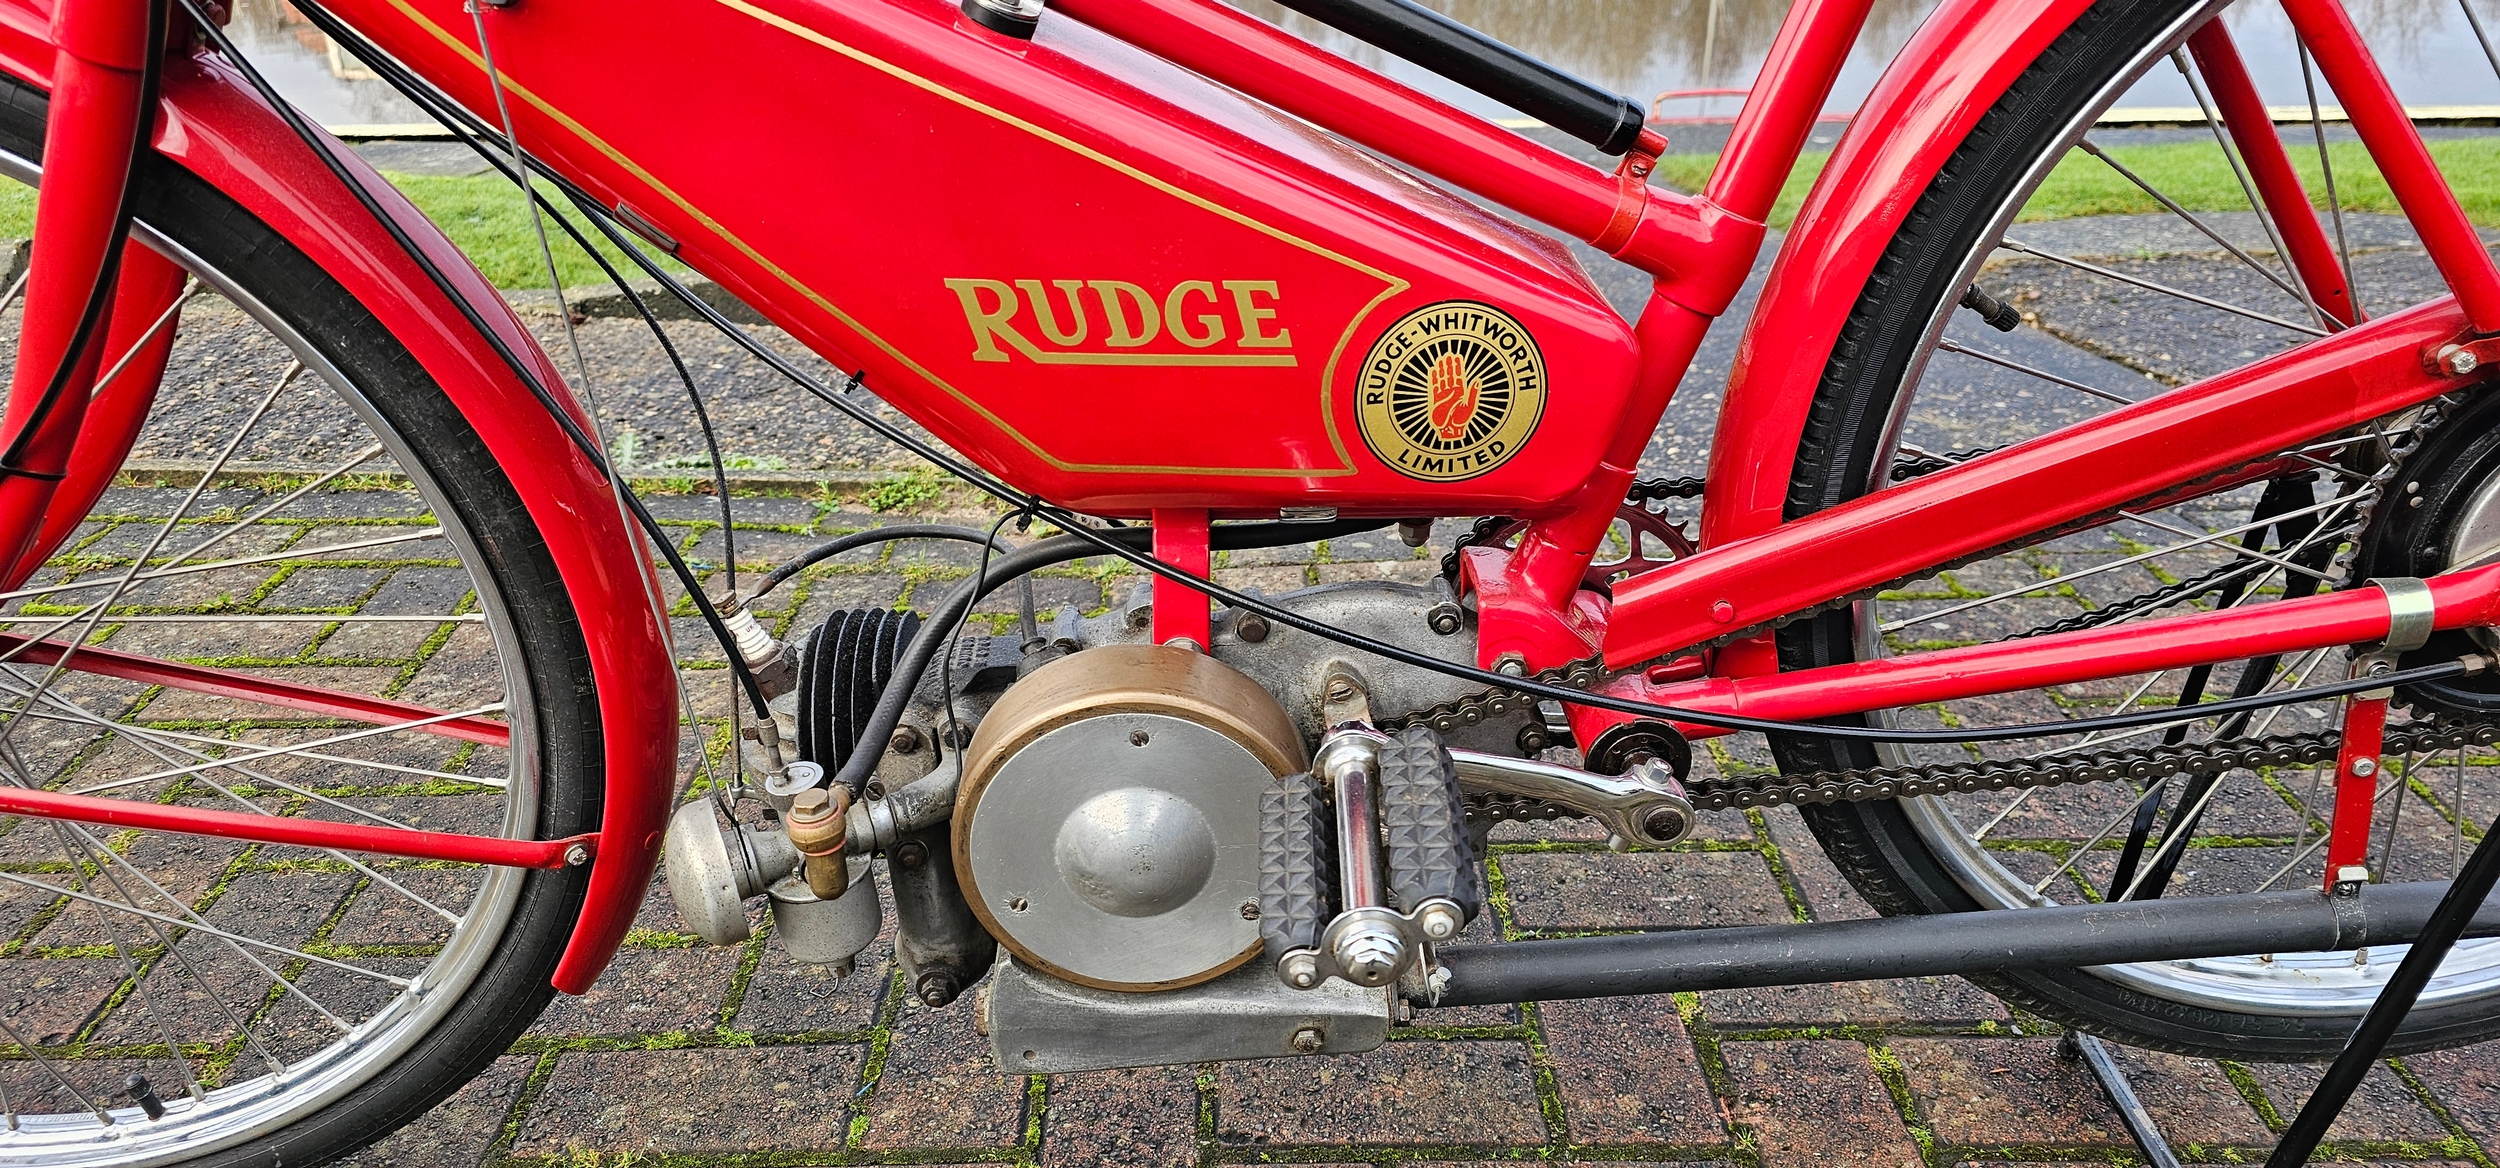 1940 Rudge Autocycle, 98cc. Registration number OFO 180 (non transferrable). Frame number 3031. - Image 13 of 13